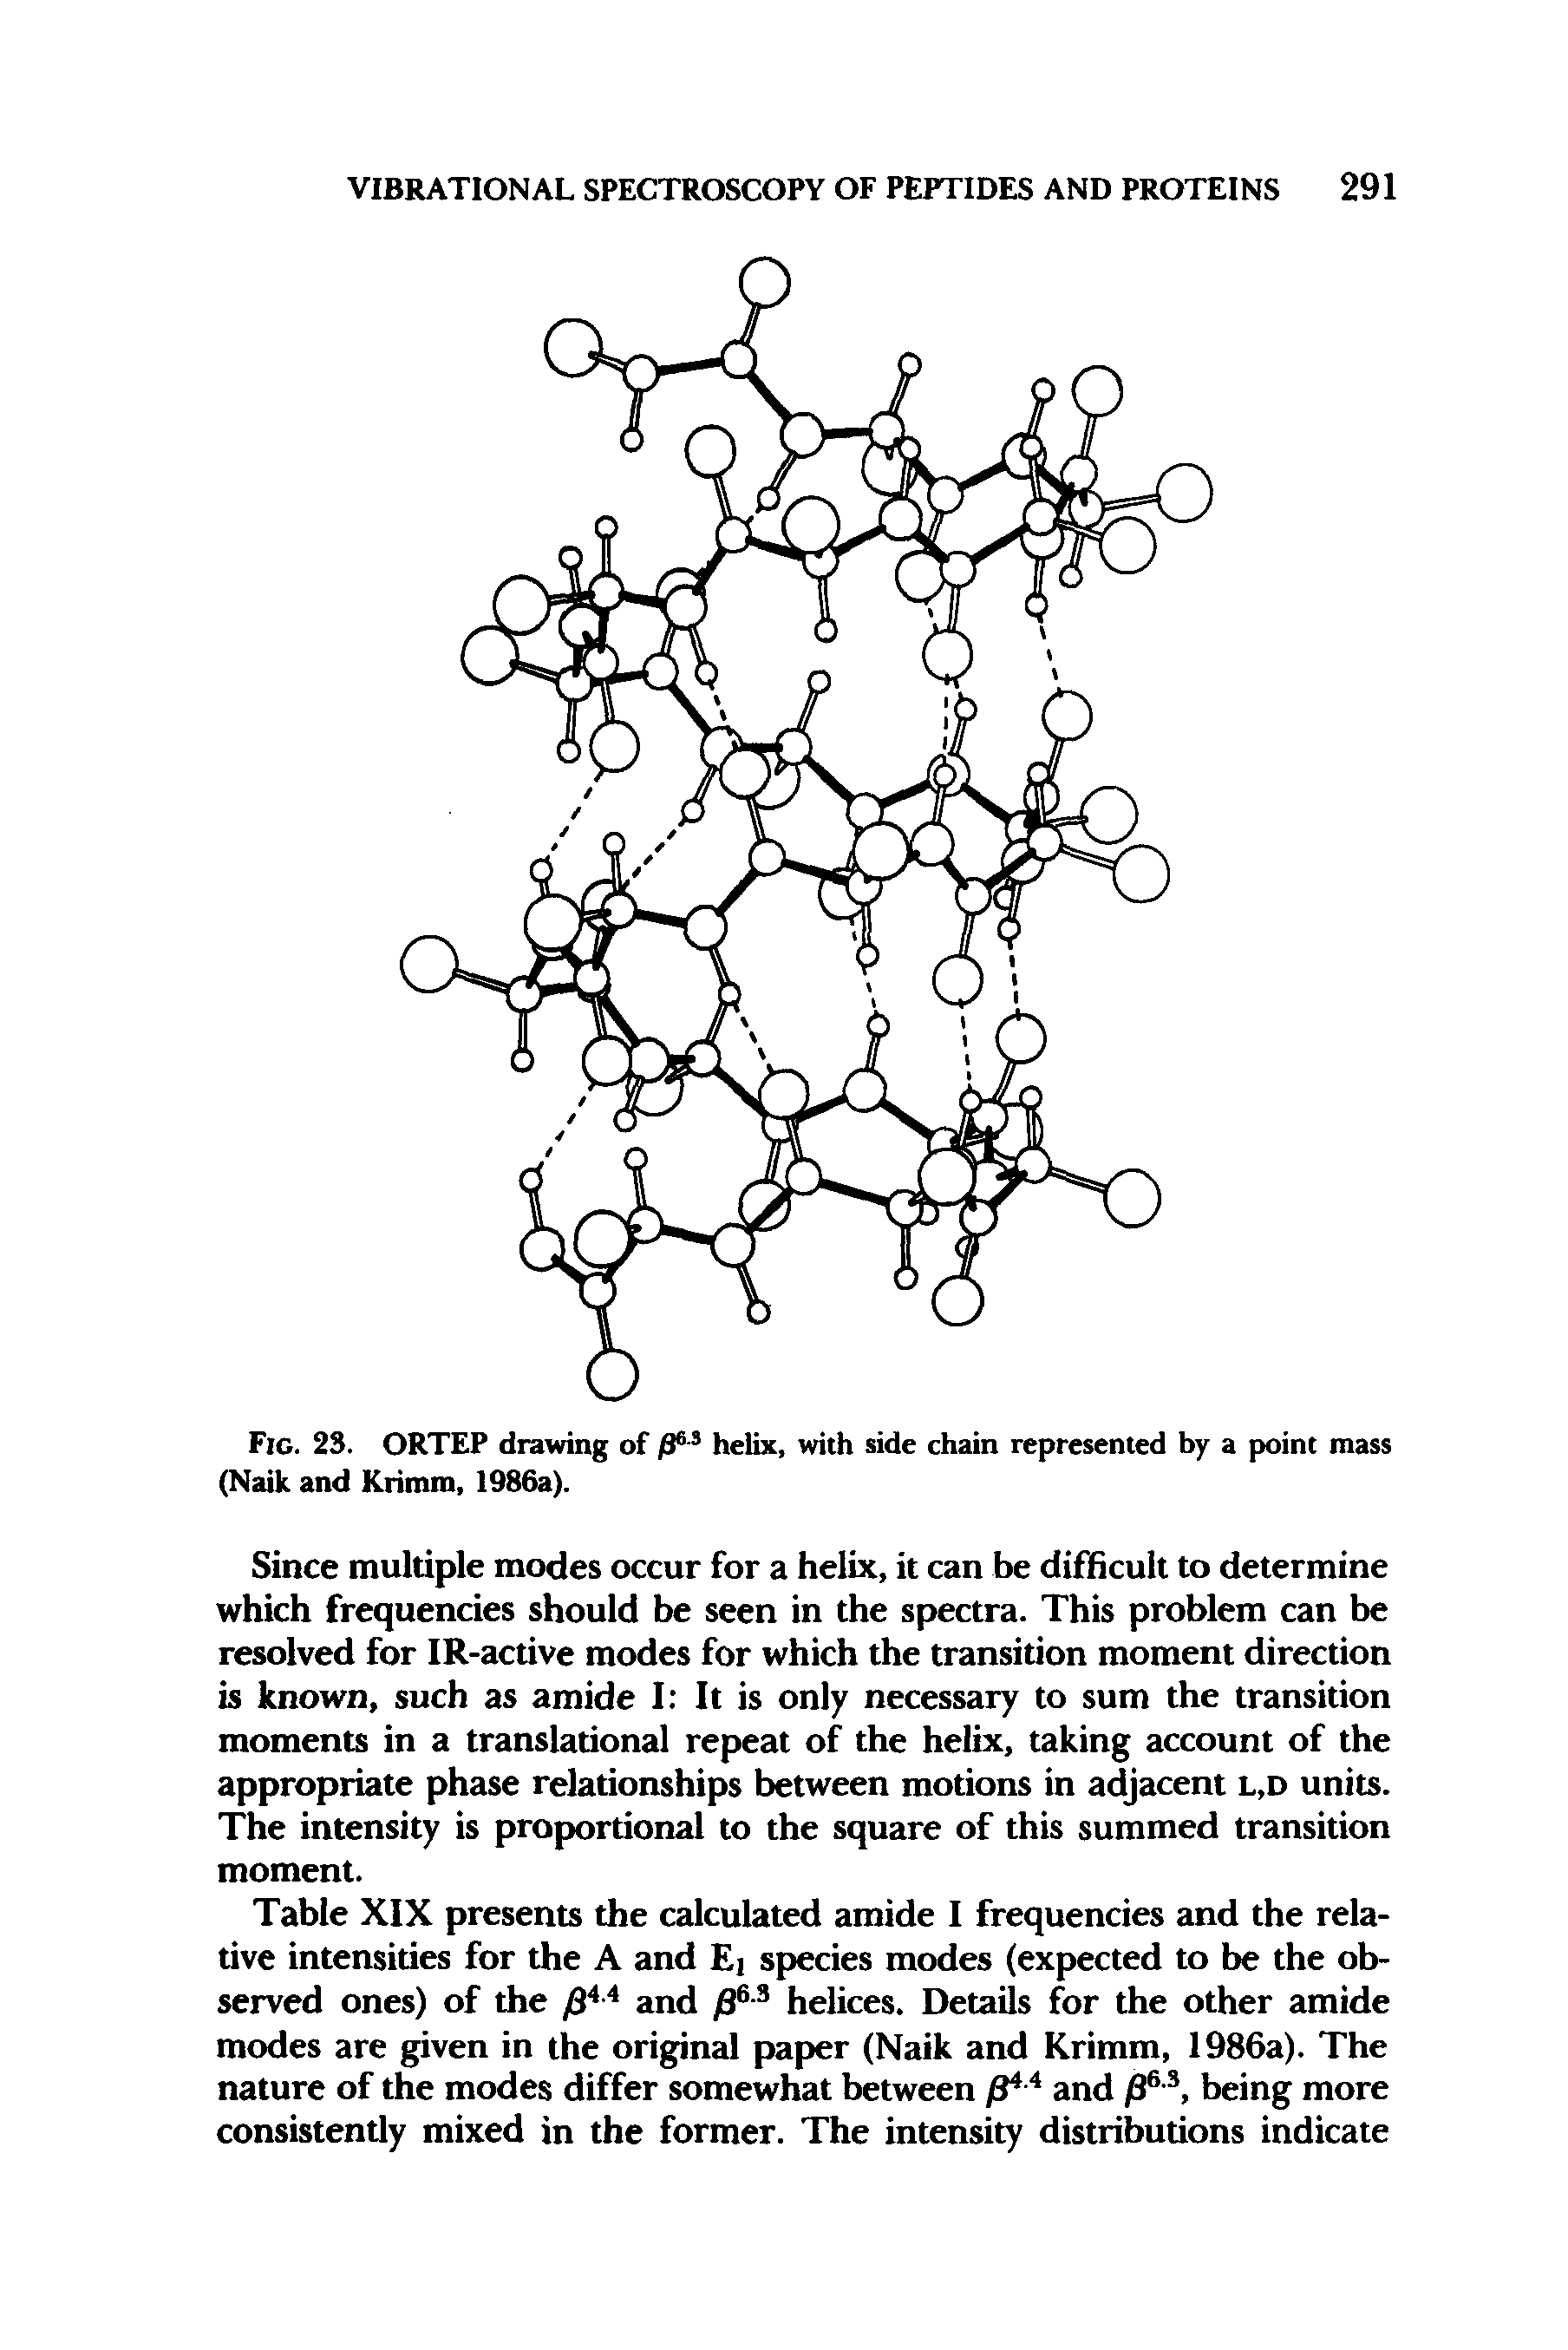 Table XIX presents the calculated amide I frequencies and the relative intensities for the A and Ej species modes (expected to be the observed ones) of the and jS - helices. Details for the other amide modes are given in the original paper (Naik and Krimm, 1986a). The nature of the modes differ somewhat between and )3 , being more...